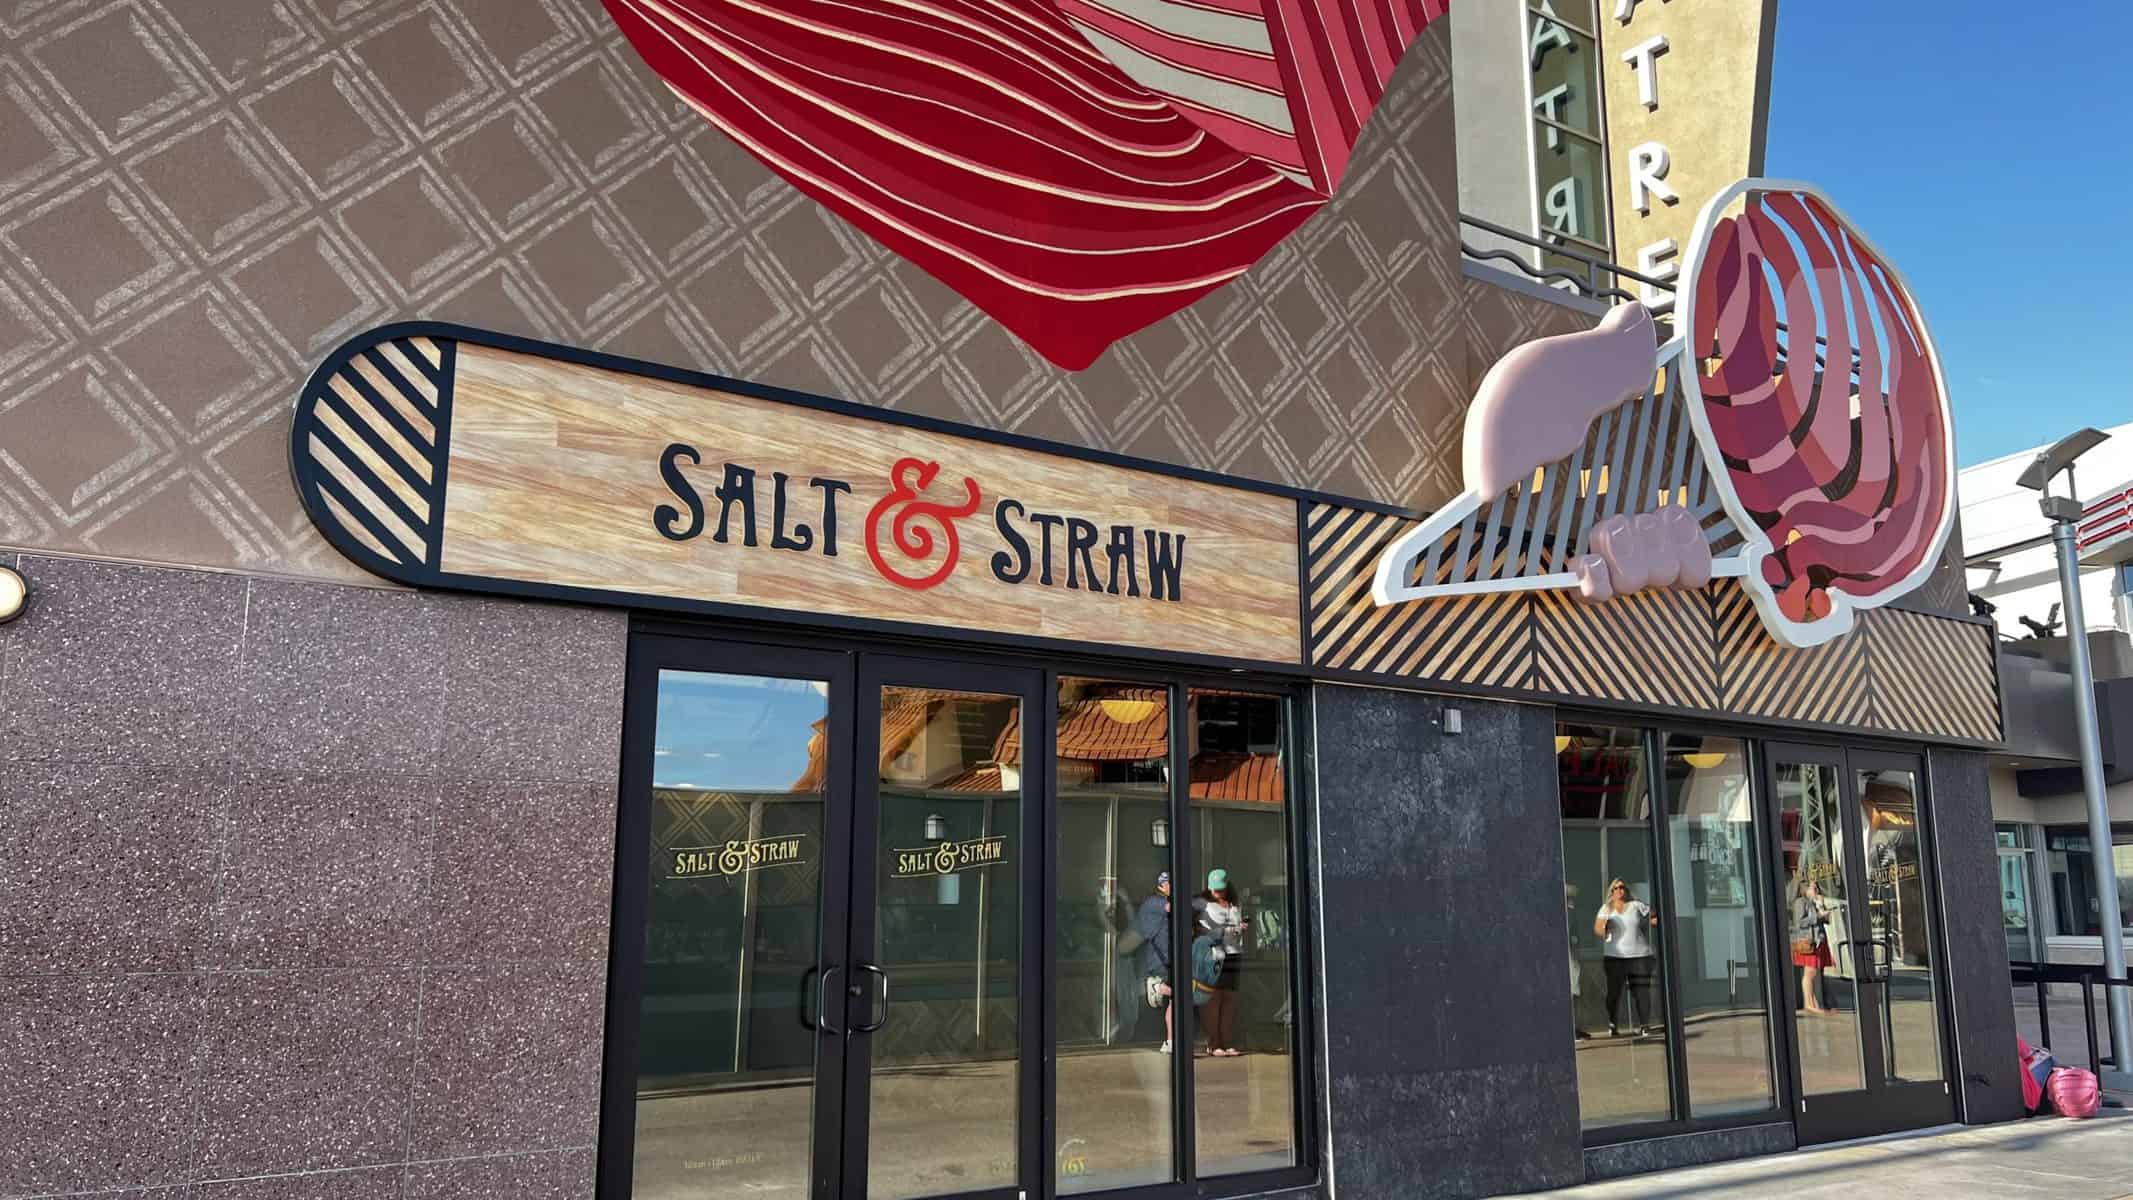 Salt & Straw Officially Opens At Disney Springs